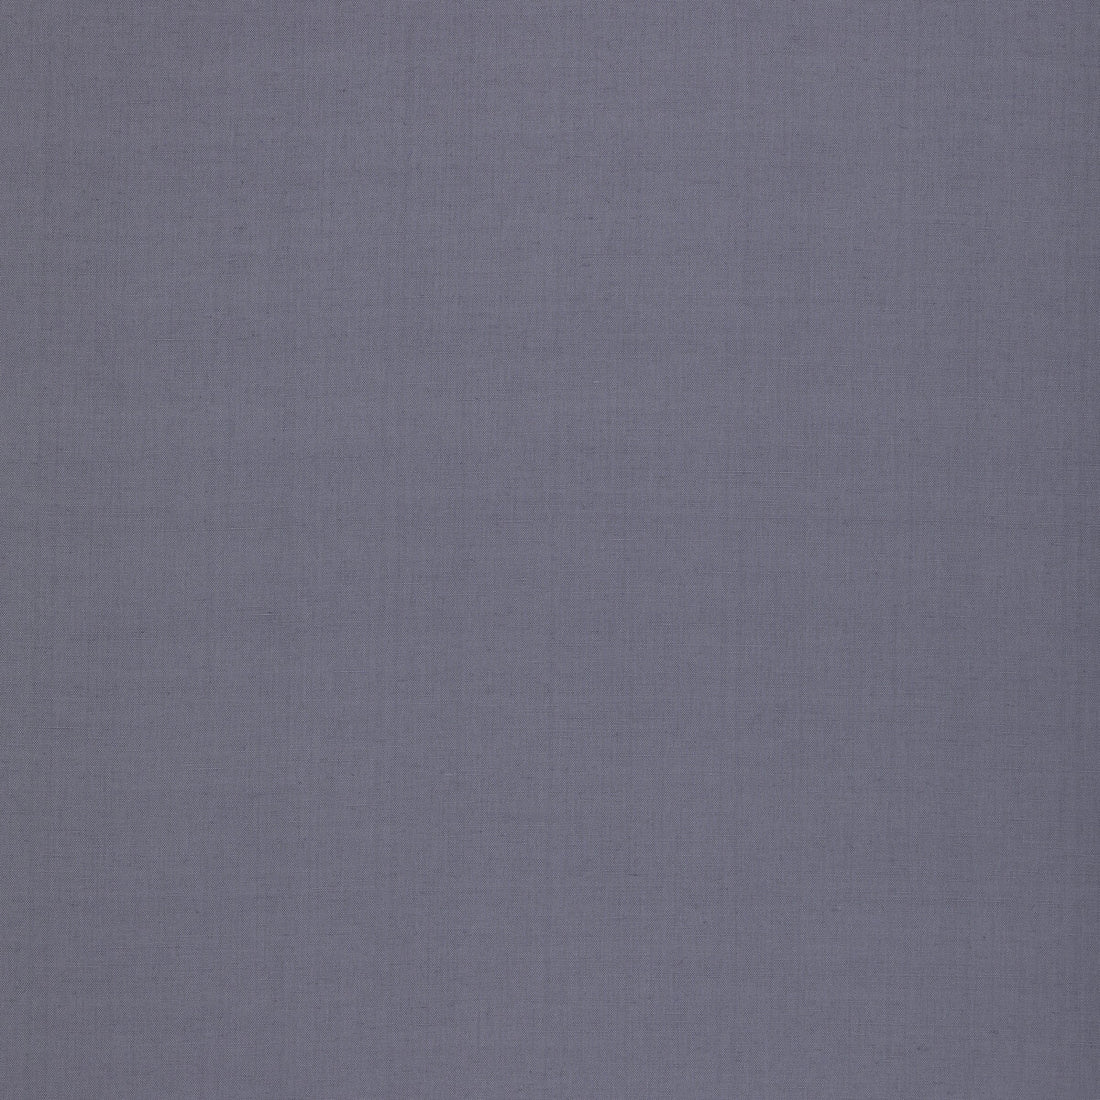 Kemble fabric in soft blue color - pattern BF11046.605.0 - by G P &amp; J Baker in the Baker House Plain &amp; Stripe II collection